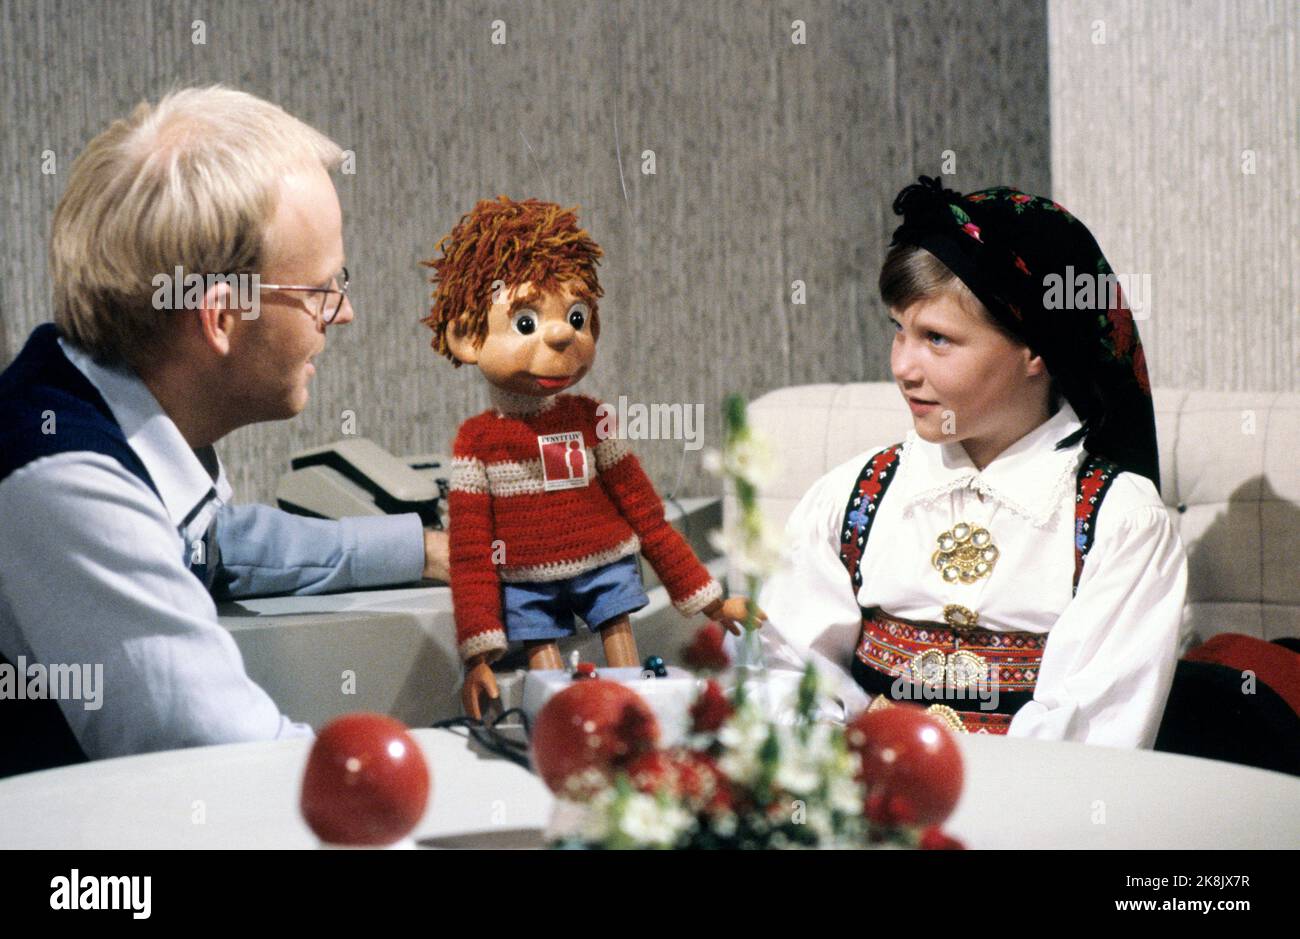 Oslo 19811025: Princess Märtha Louise in the TV studio in connection with the TV action 'A new life'. Together with the princess is the program director Trond-Viggo Torgersen and the children's hour-doll 'Titten Tei'. The princess wearing bunad. Photo: Erik Thorberg / NTB / NTB - - The picture is 47 MB - - - Stock Photo